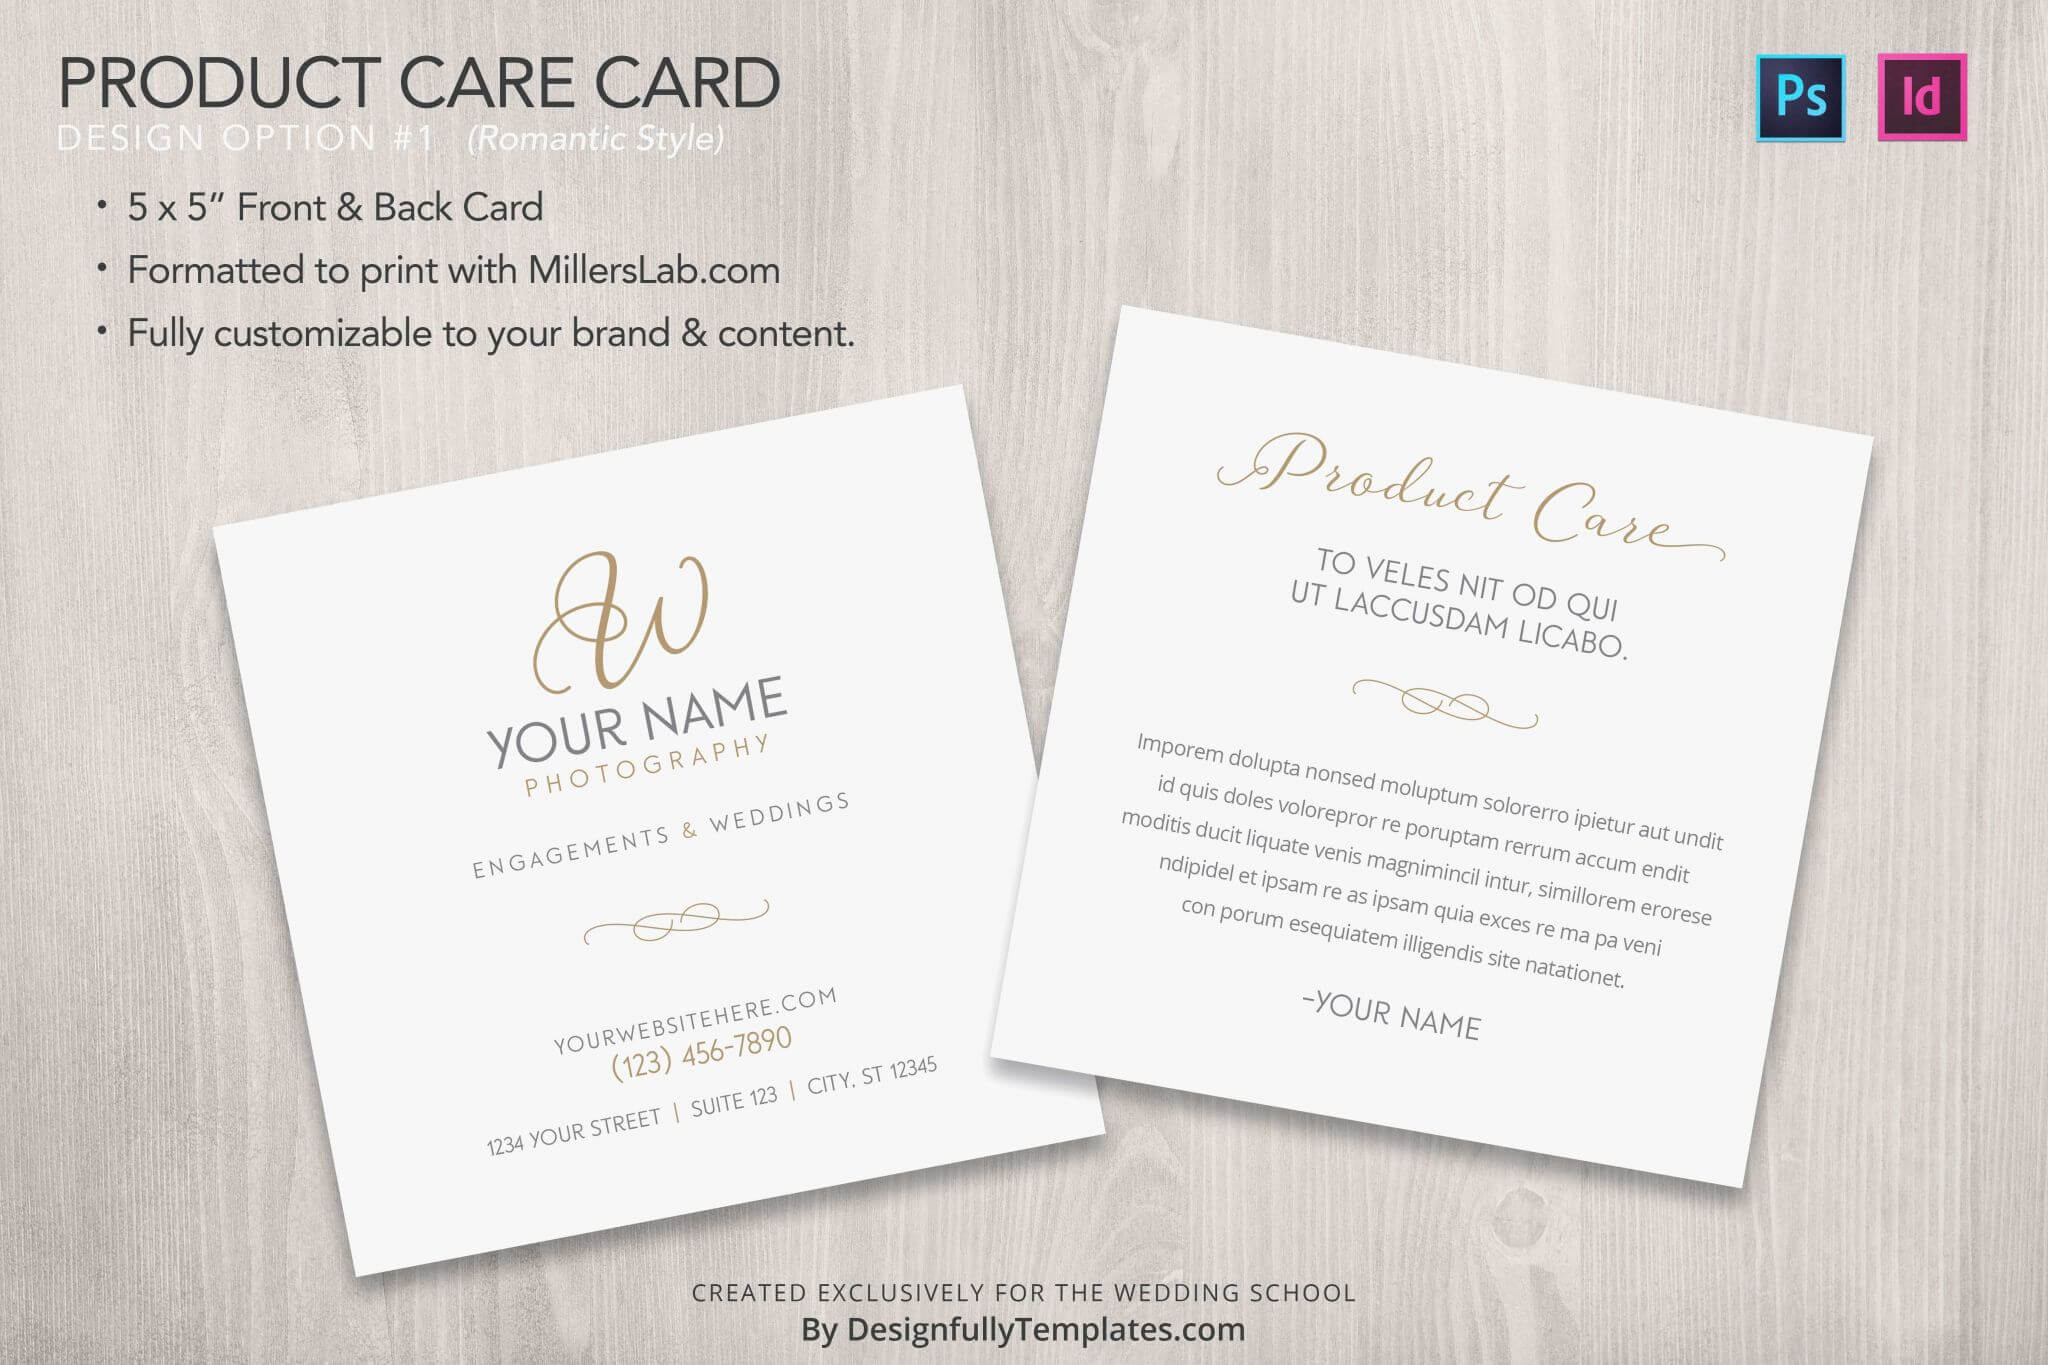 Free Place Card Templates 6 Per Page - Atlantaauctionco Inside Free Place Card Templates 6 Per Page